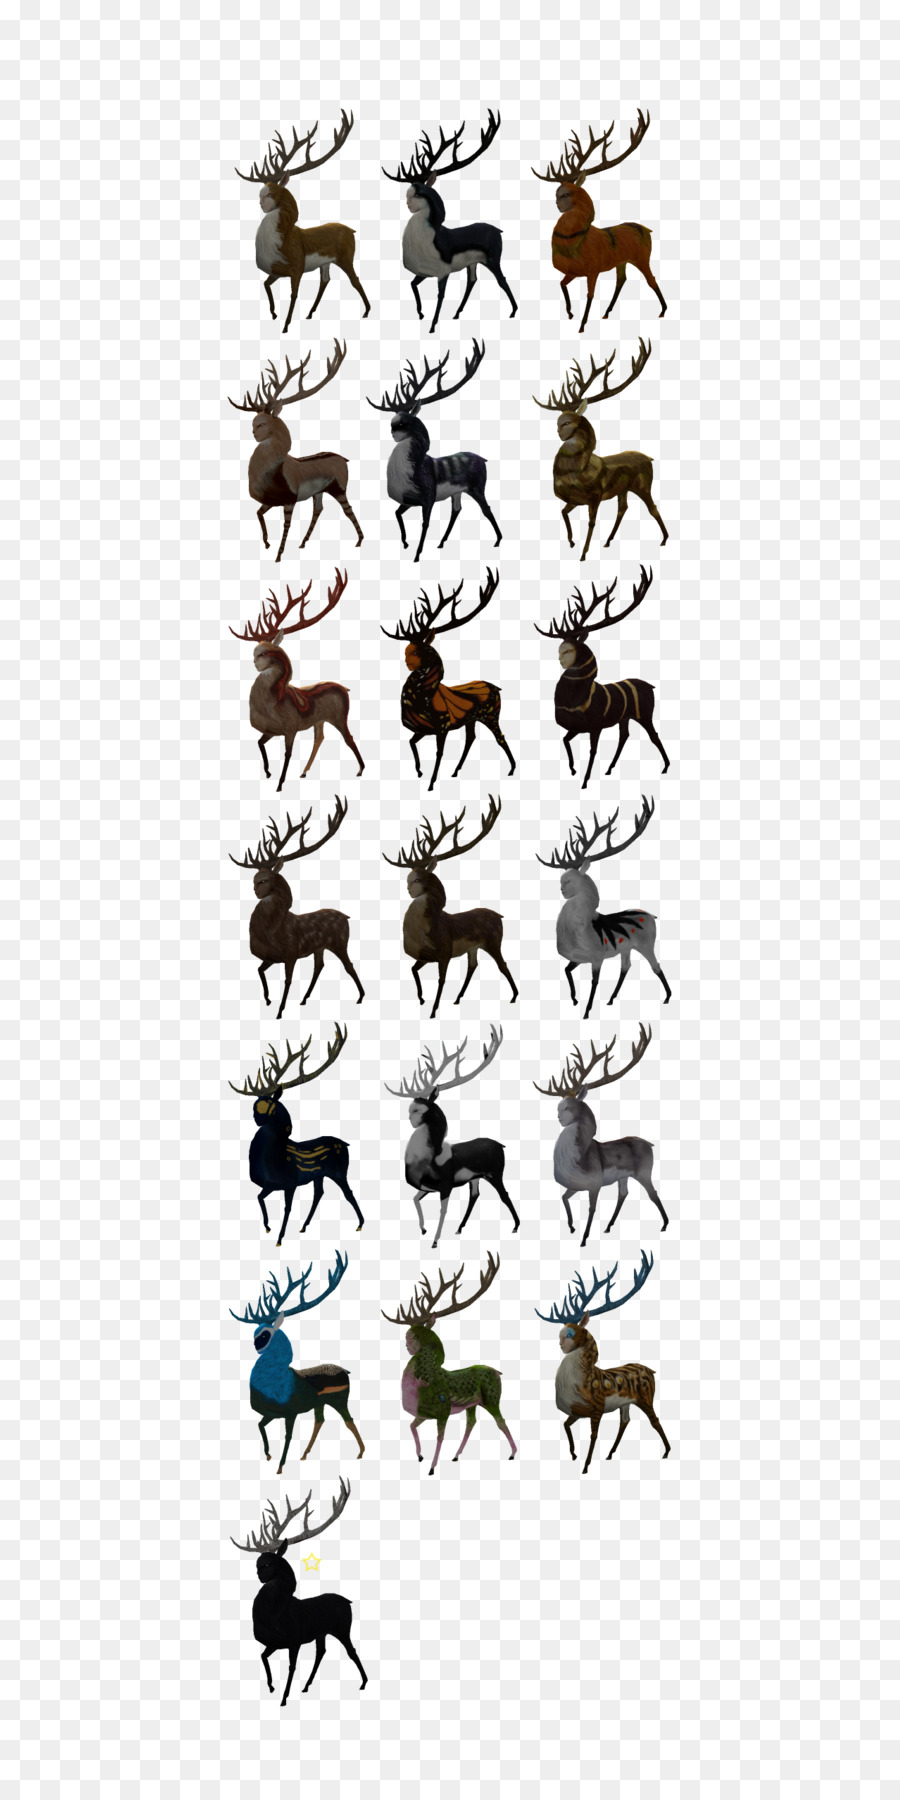 The Endless Forest Deer Fur Antler Insect - forest animal png download - 445*1795 - Free Transparent Endless Forest png Download.